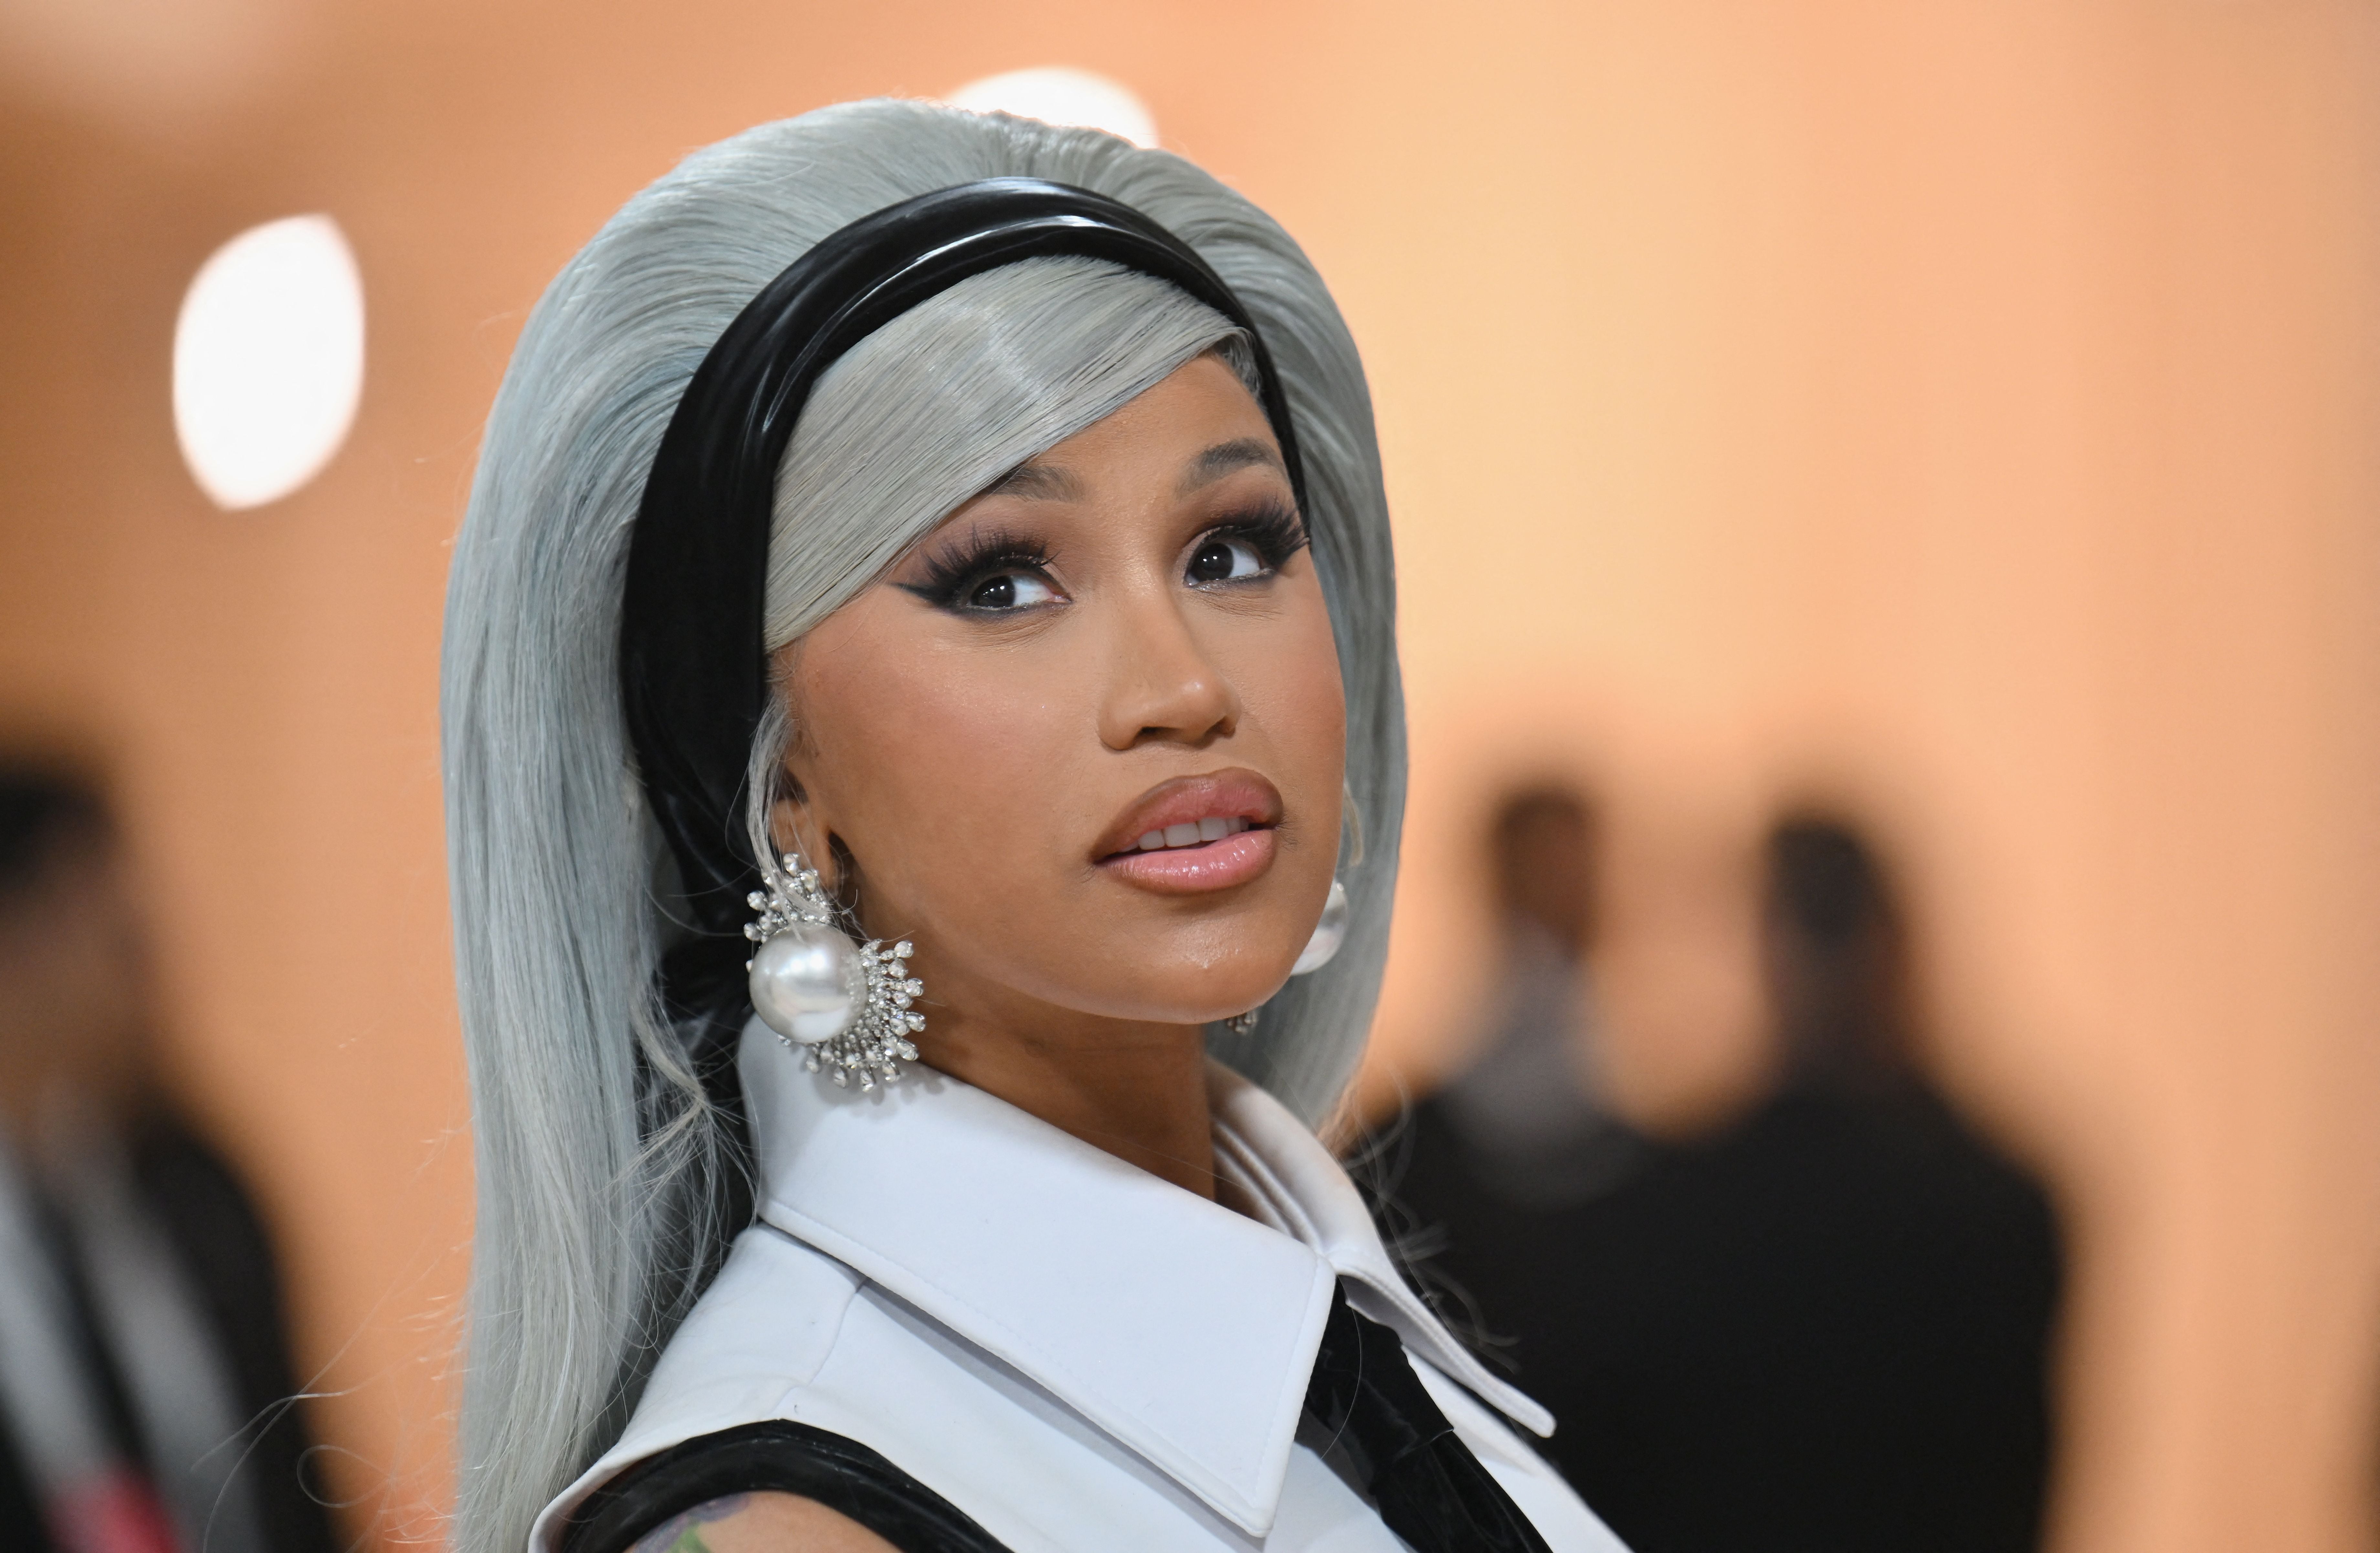 Cardi B Debuted a French Manicure With Mile-Long White Tips — See